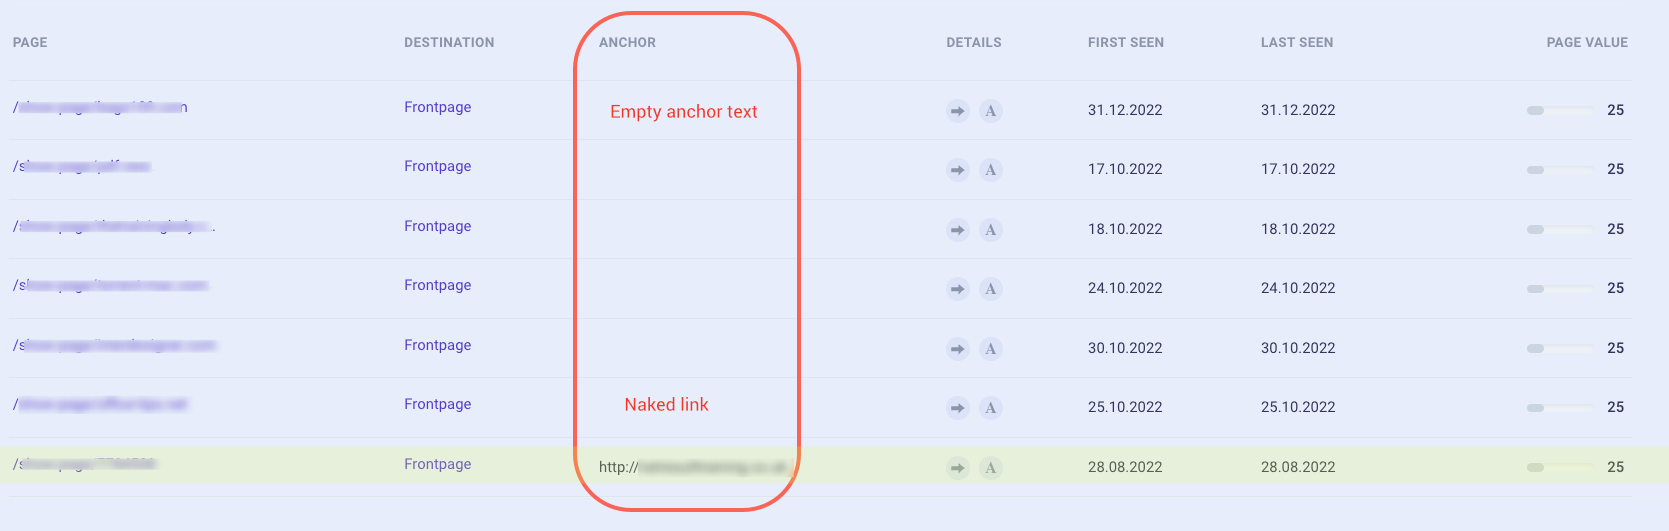 Bad anchor texts examples in Morningscore SEO tool